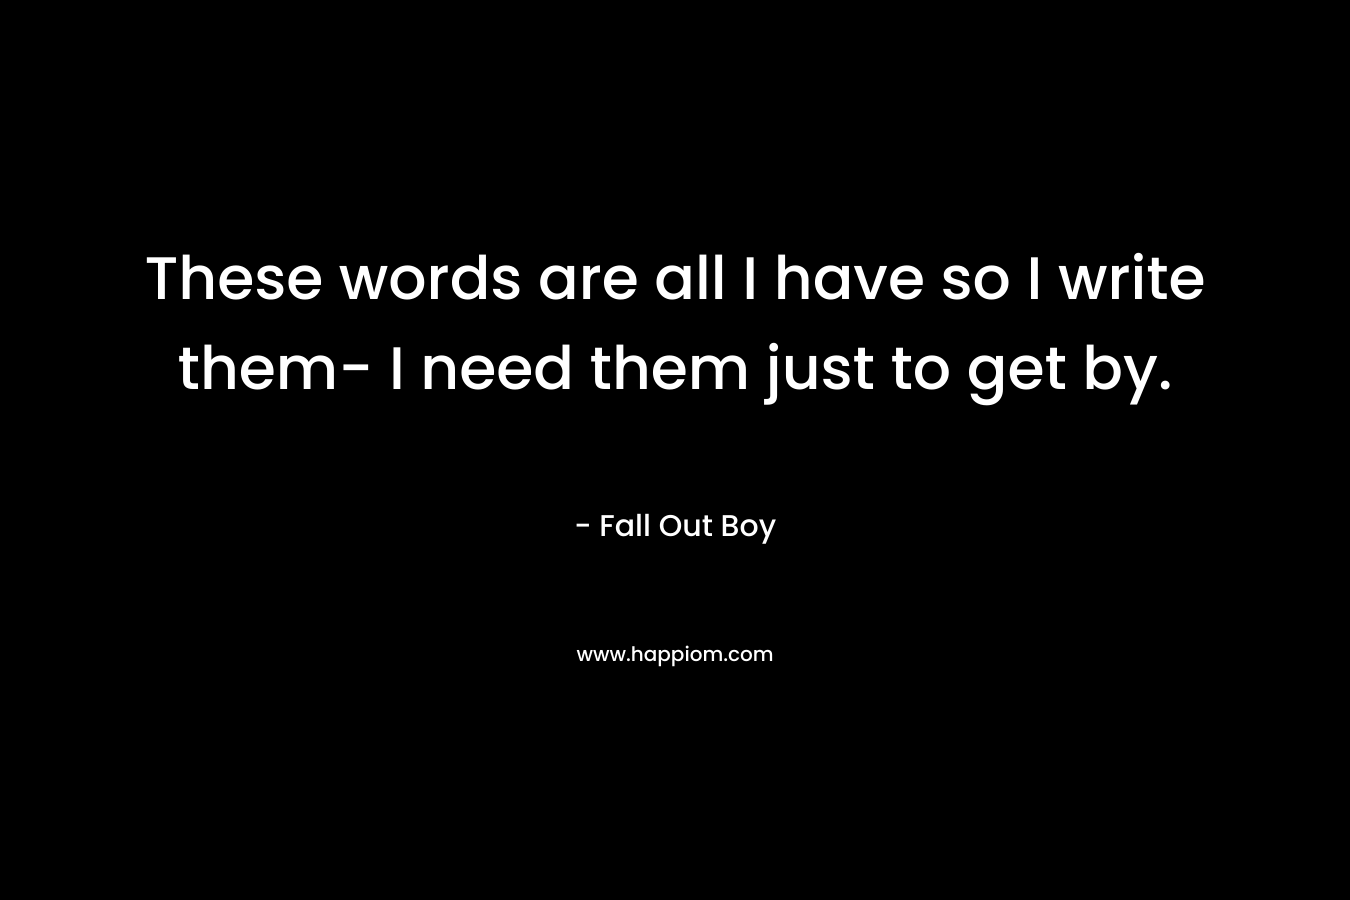 These words are all I have so I write them- I need them just to get by. – Fall Out Boy